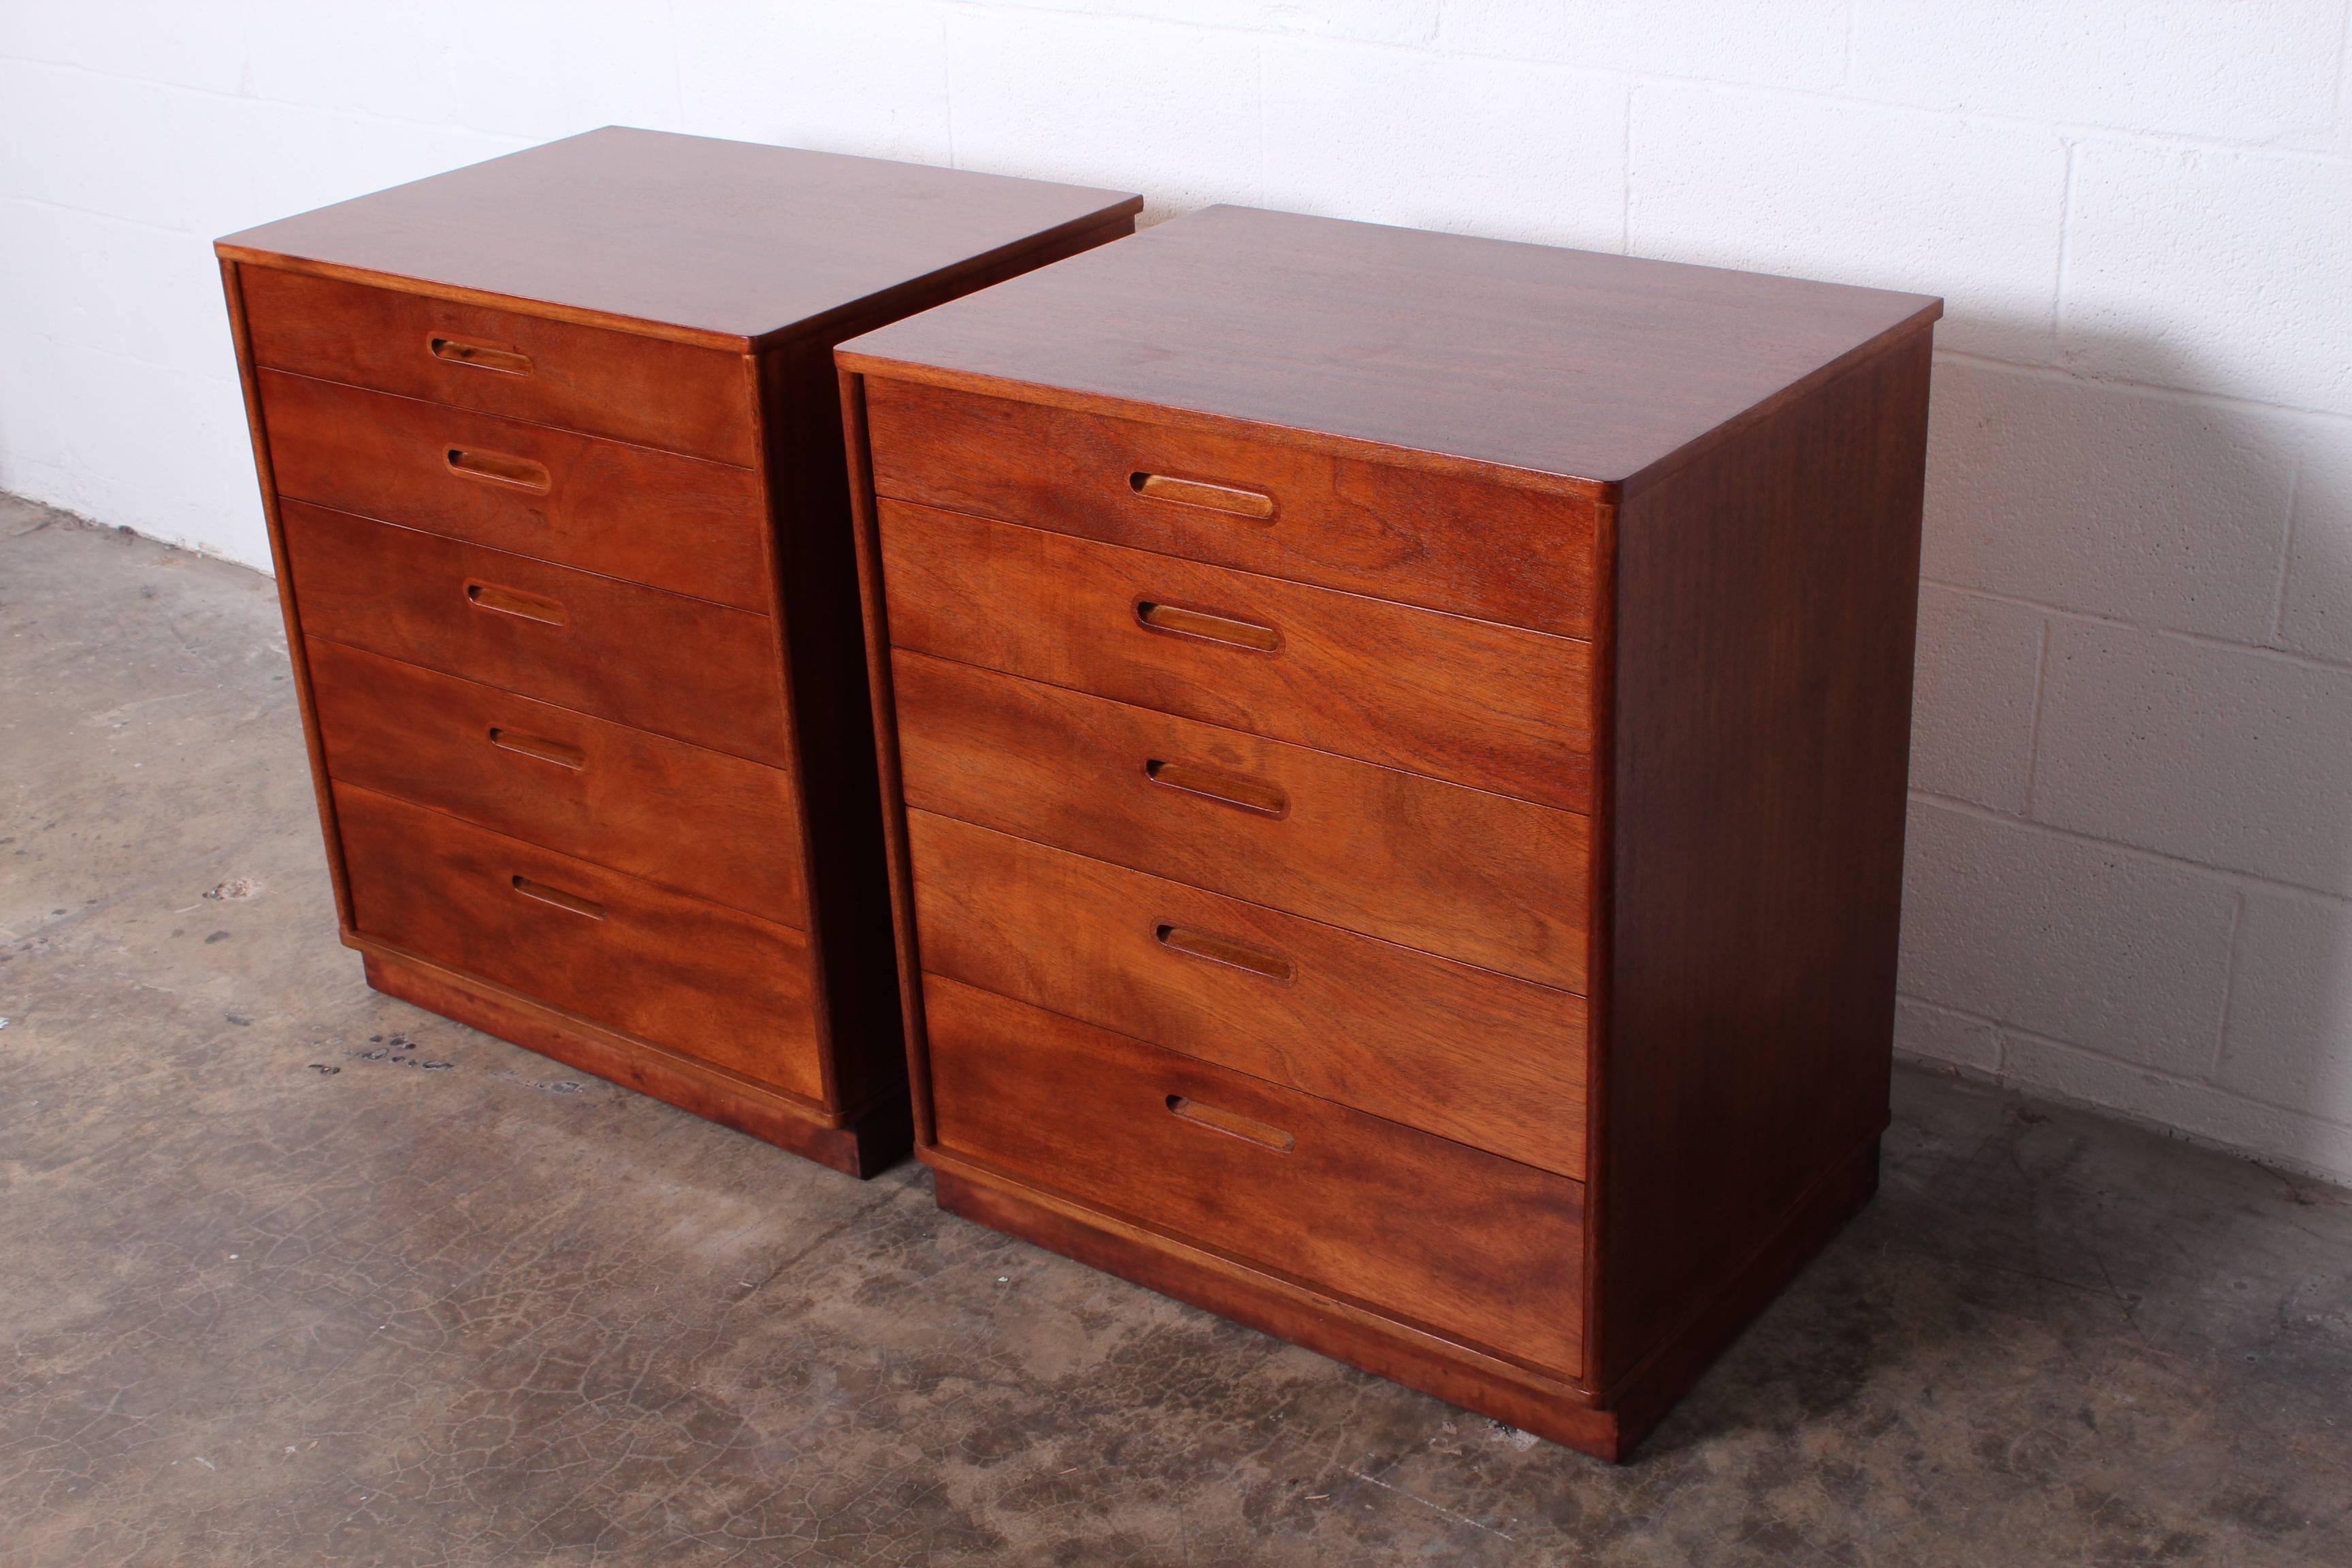 Pair of Cabinets/Nightstands by Edward Wormley for Dunbar 1